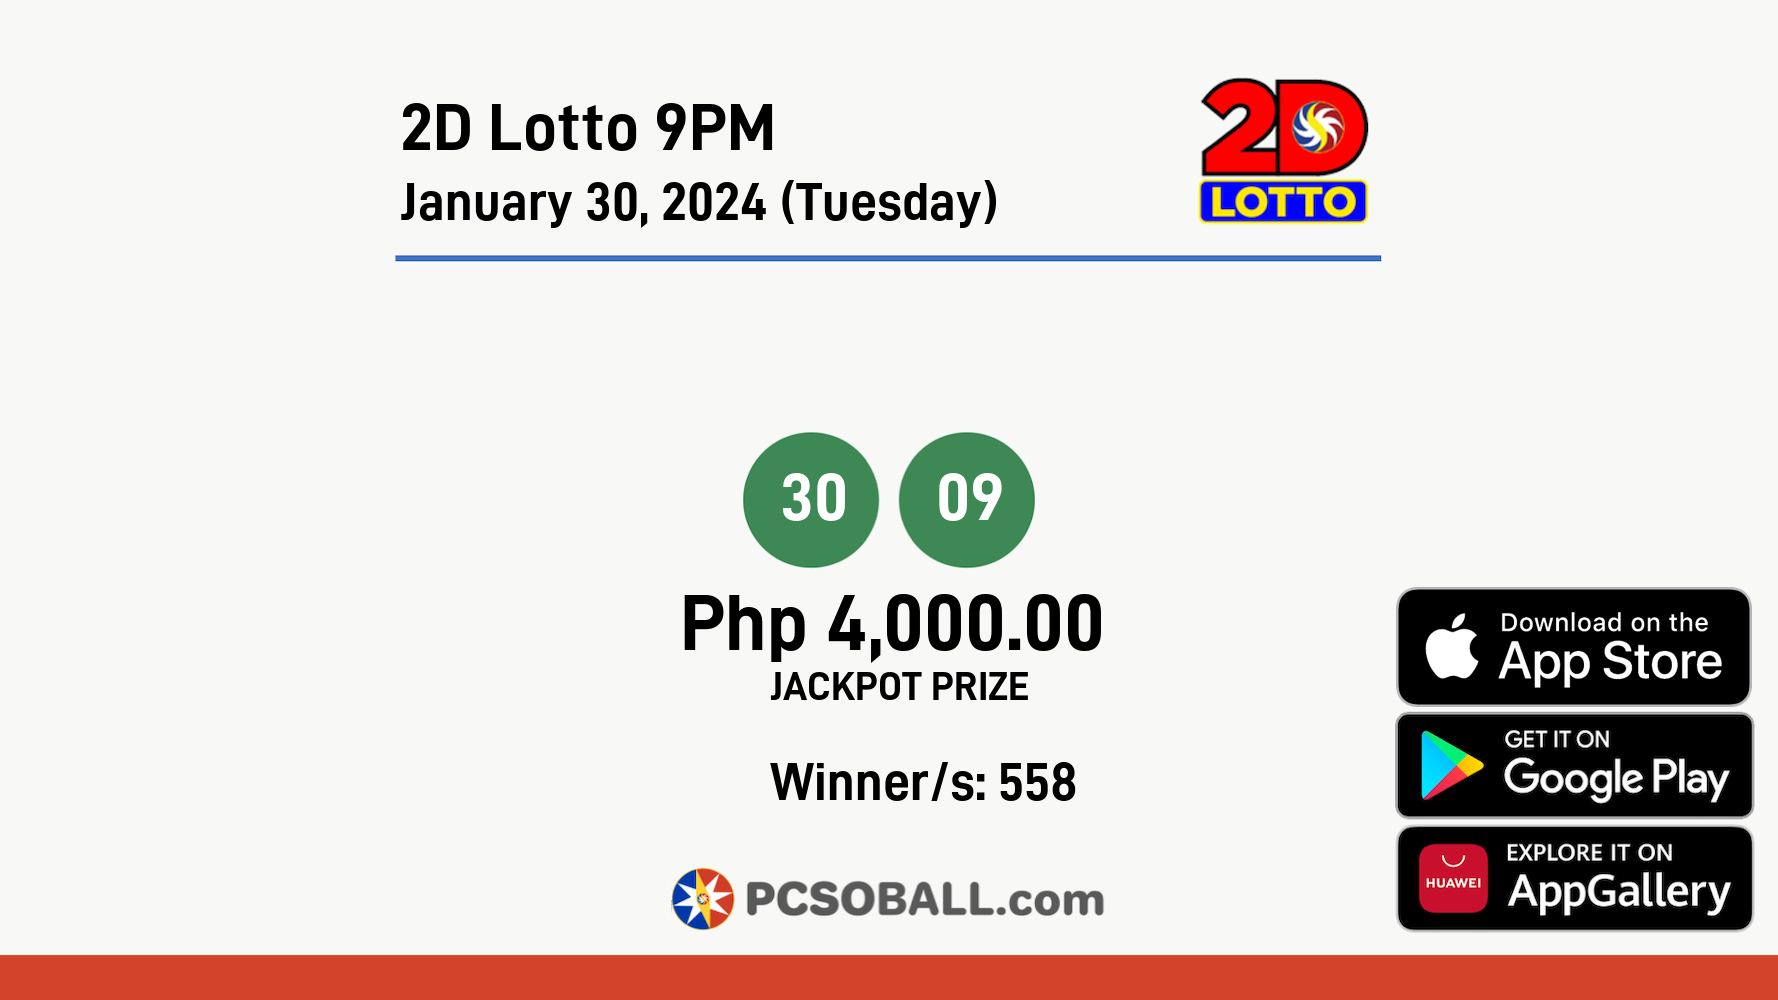 2D Lotto 9PM January 30, 2024 (Tuesday) Result